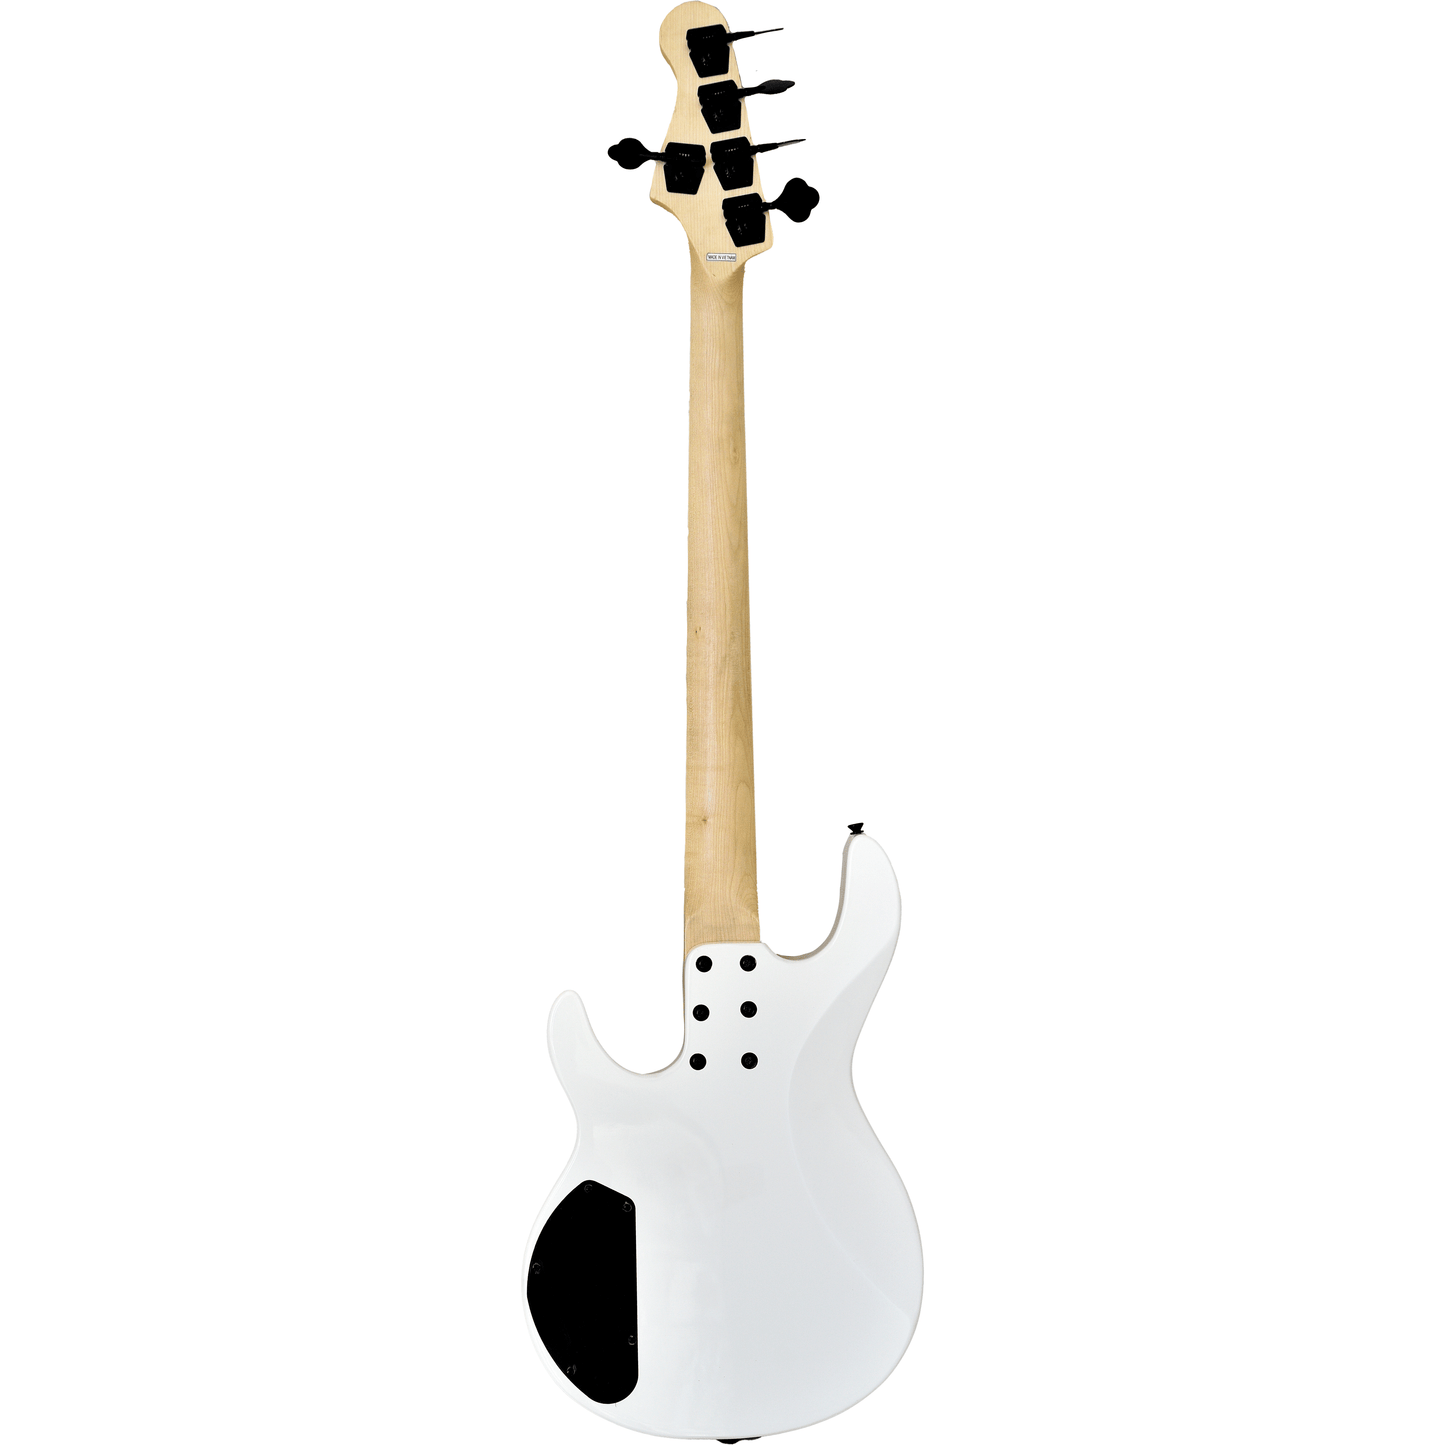 Moonray-5 Arctic White Left or Right Hand With Wolf Hard Case